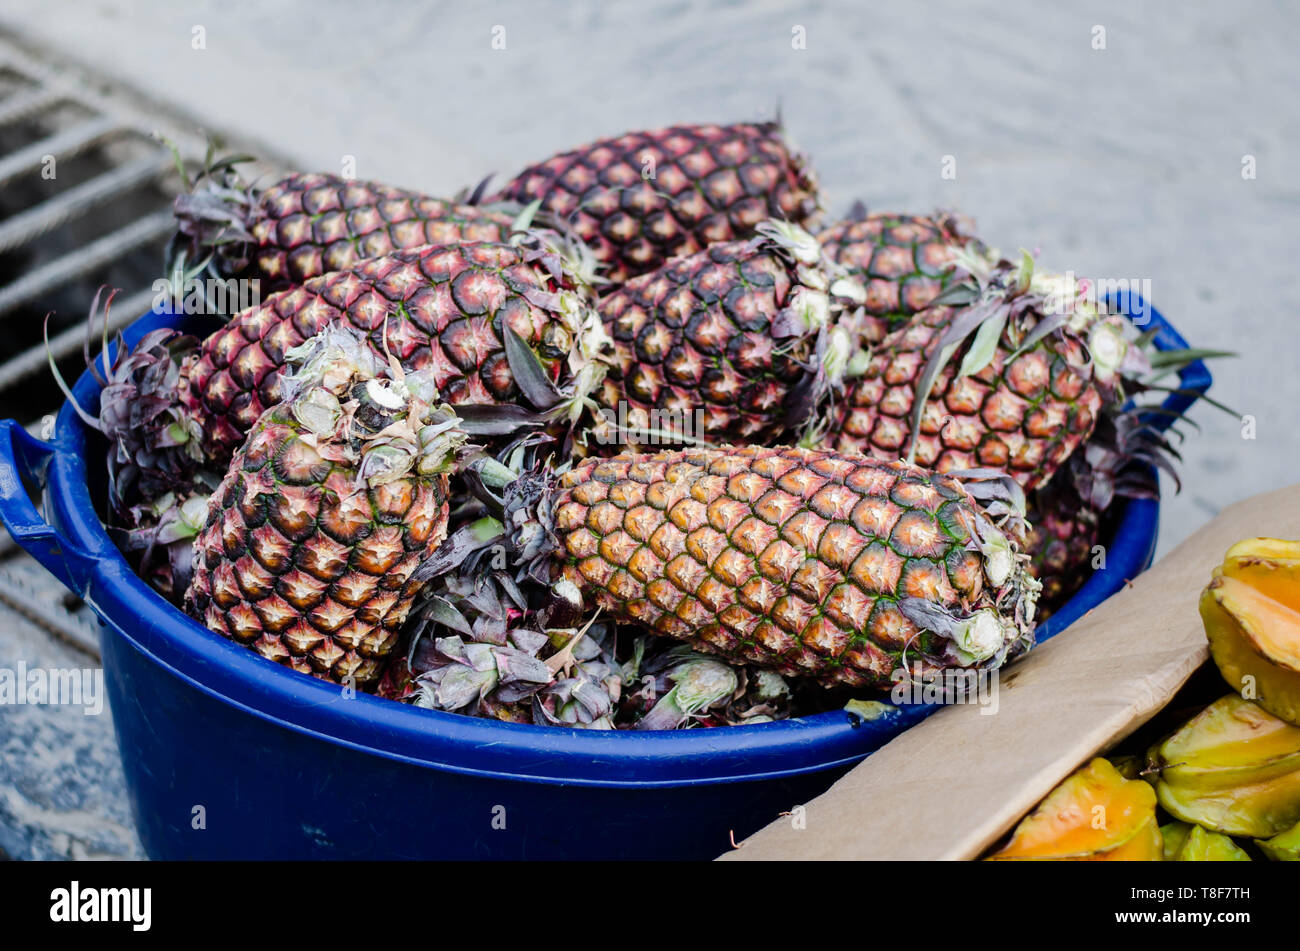 Peruvian pineapples are generally larger than Hawaiian pineapples, with a more elongated shape and bigger crown. Stock Photo